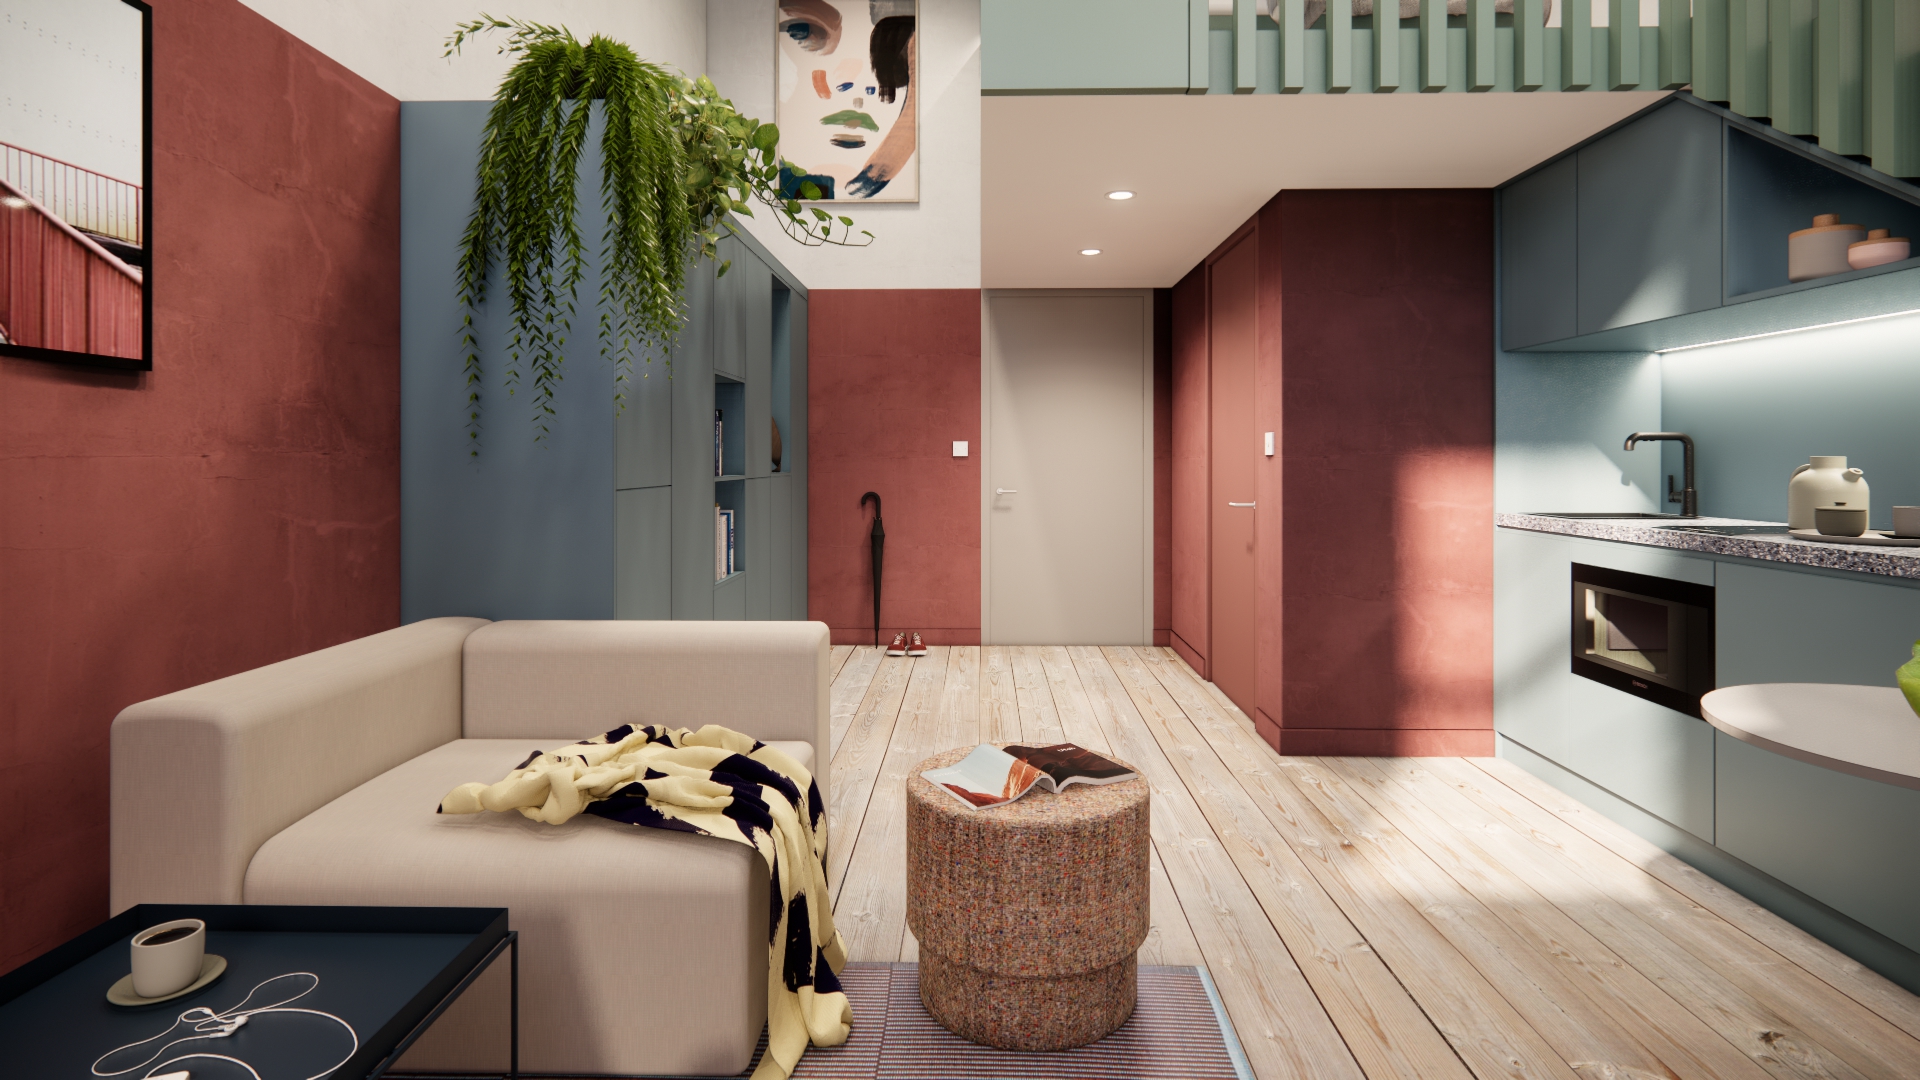 In Pictures: BOHO unveils first glimpse of Glasgow boutique student residence